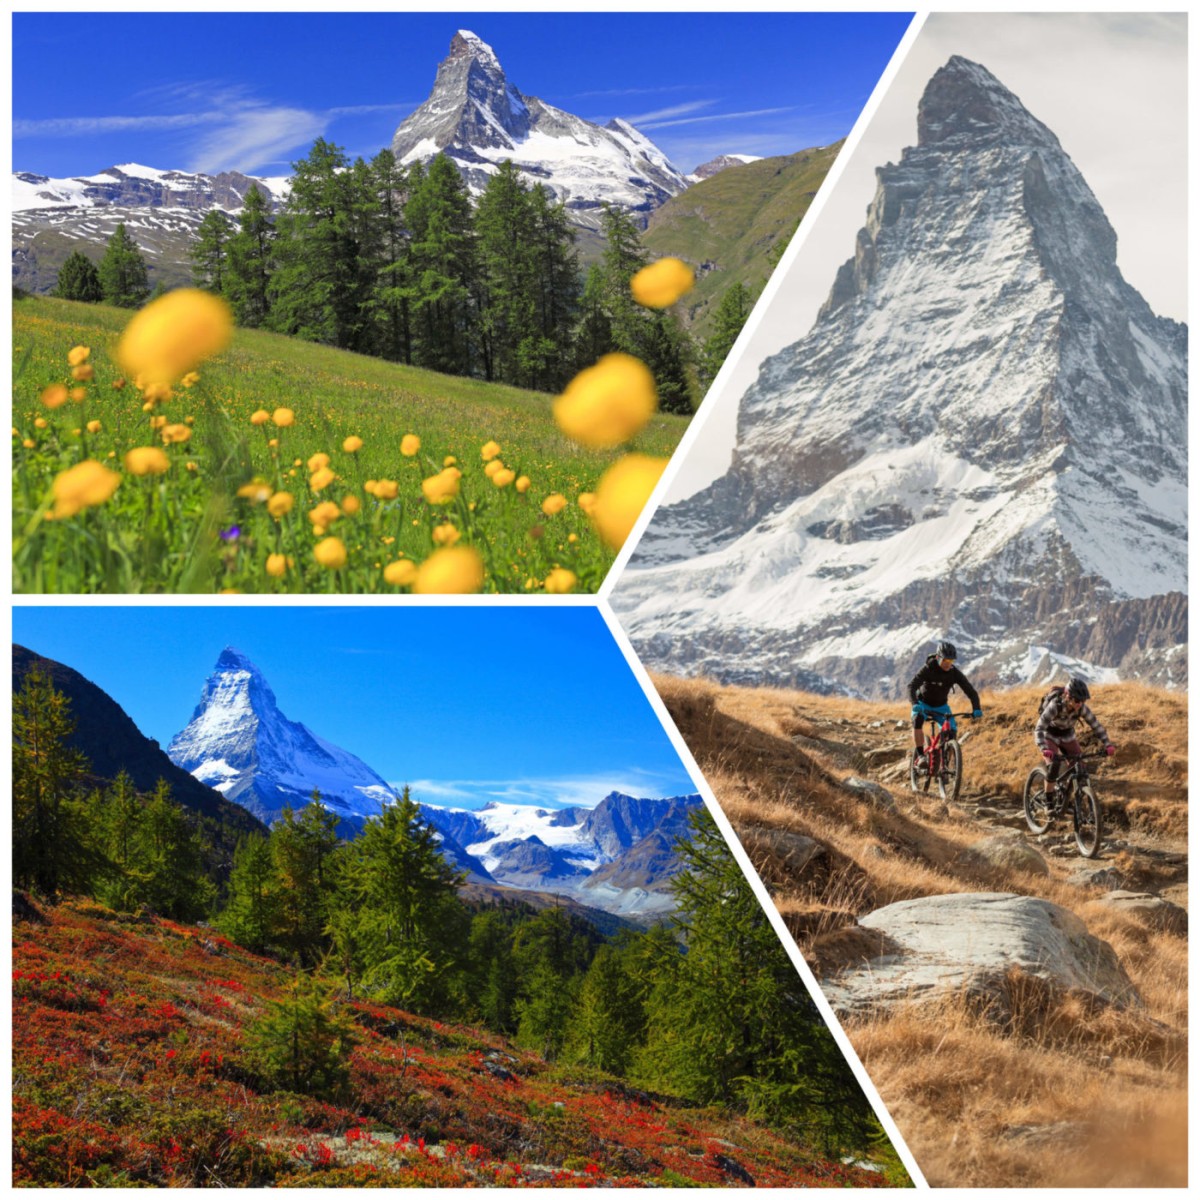 Canton Valais – globeflowers on a meadow in front of the Matterhorn; view at the Matterhorn from a mountain slope with blueberry bushes in autumn colouration; cycling tour in the Zermatt area